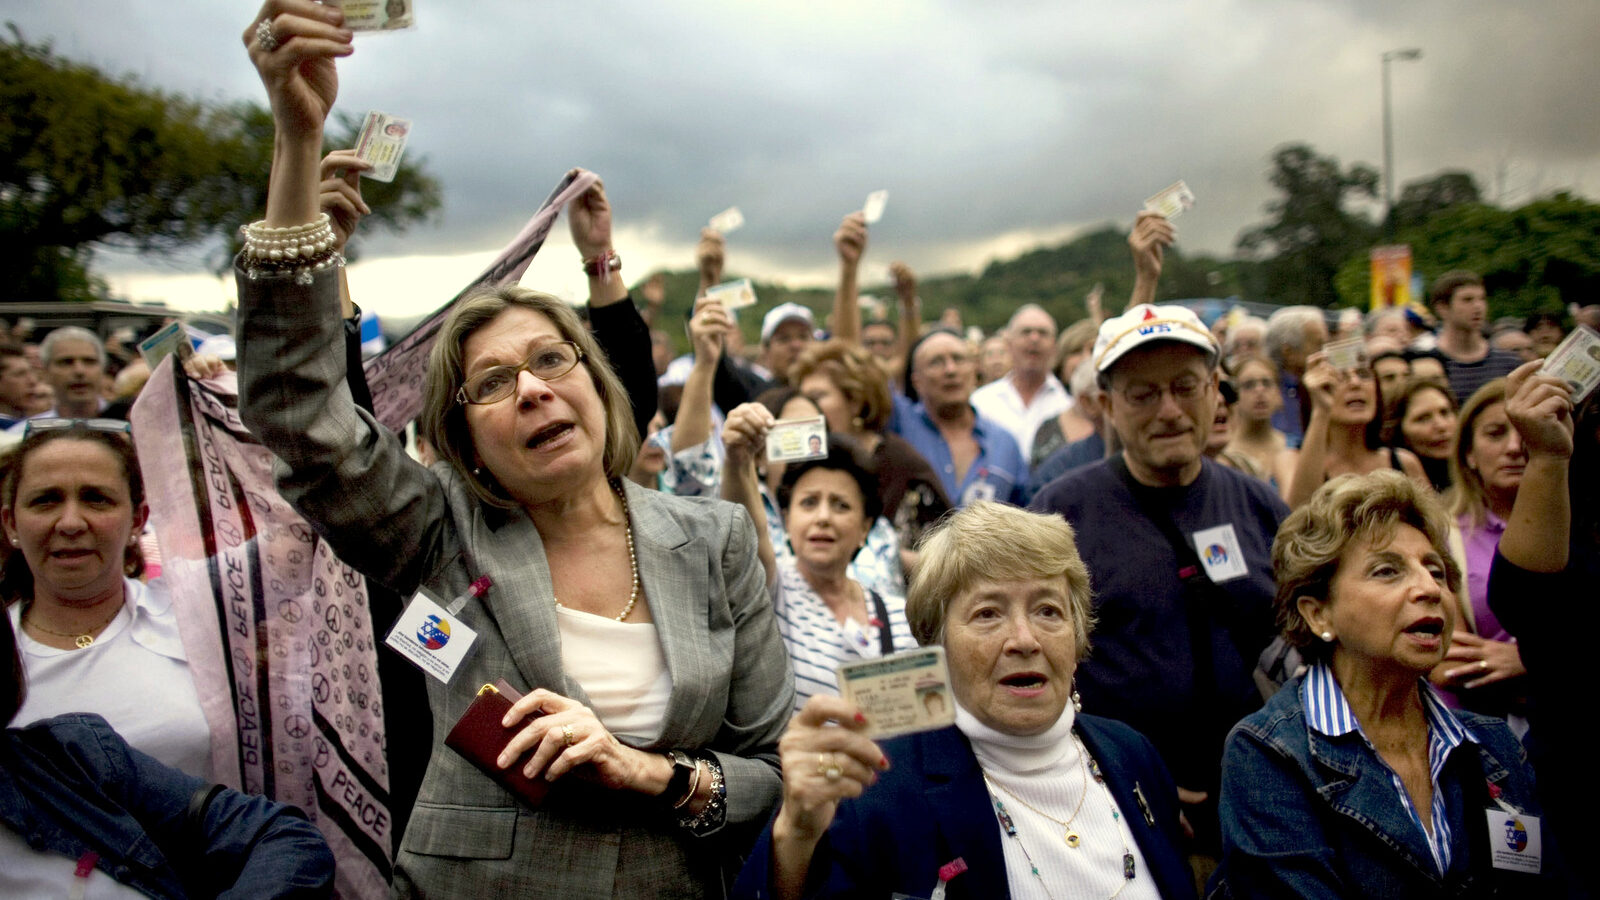 In this Feb. 2009 photo, Venezuelans hold up their ID cards during a protest against anti-semitism outside a synagogue in Caracas, Venezuela following outrage at the 2009 Israeli war on the Gaza Strip. (AP/Ariana Cubillos)